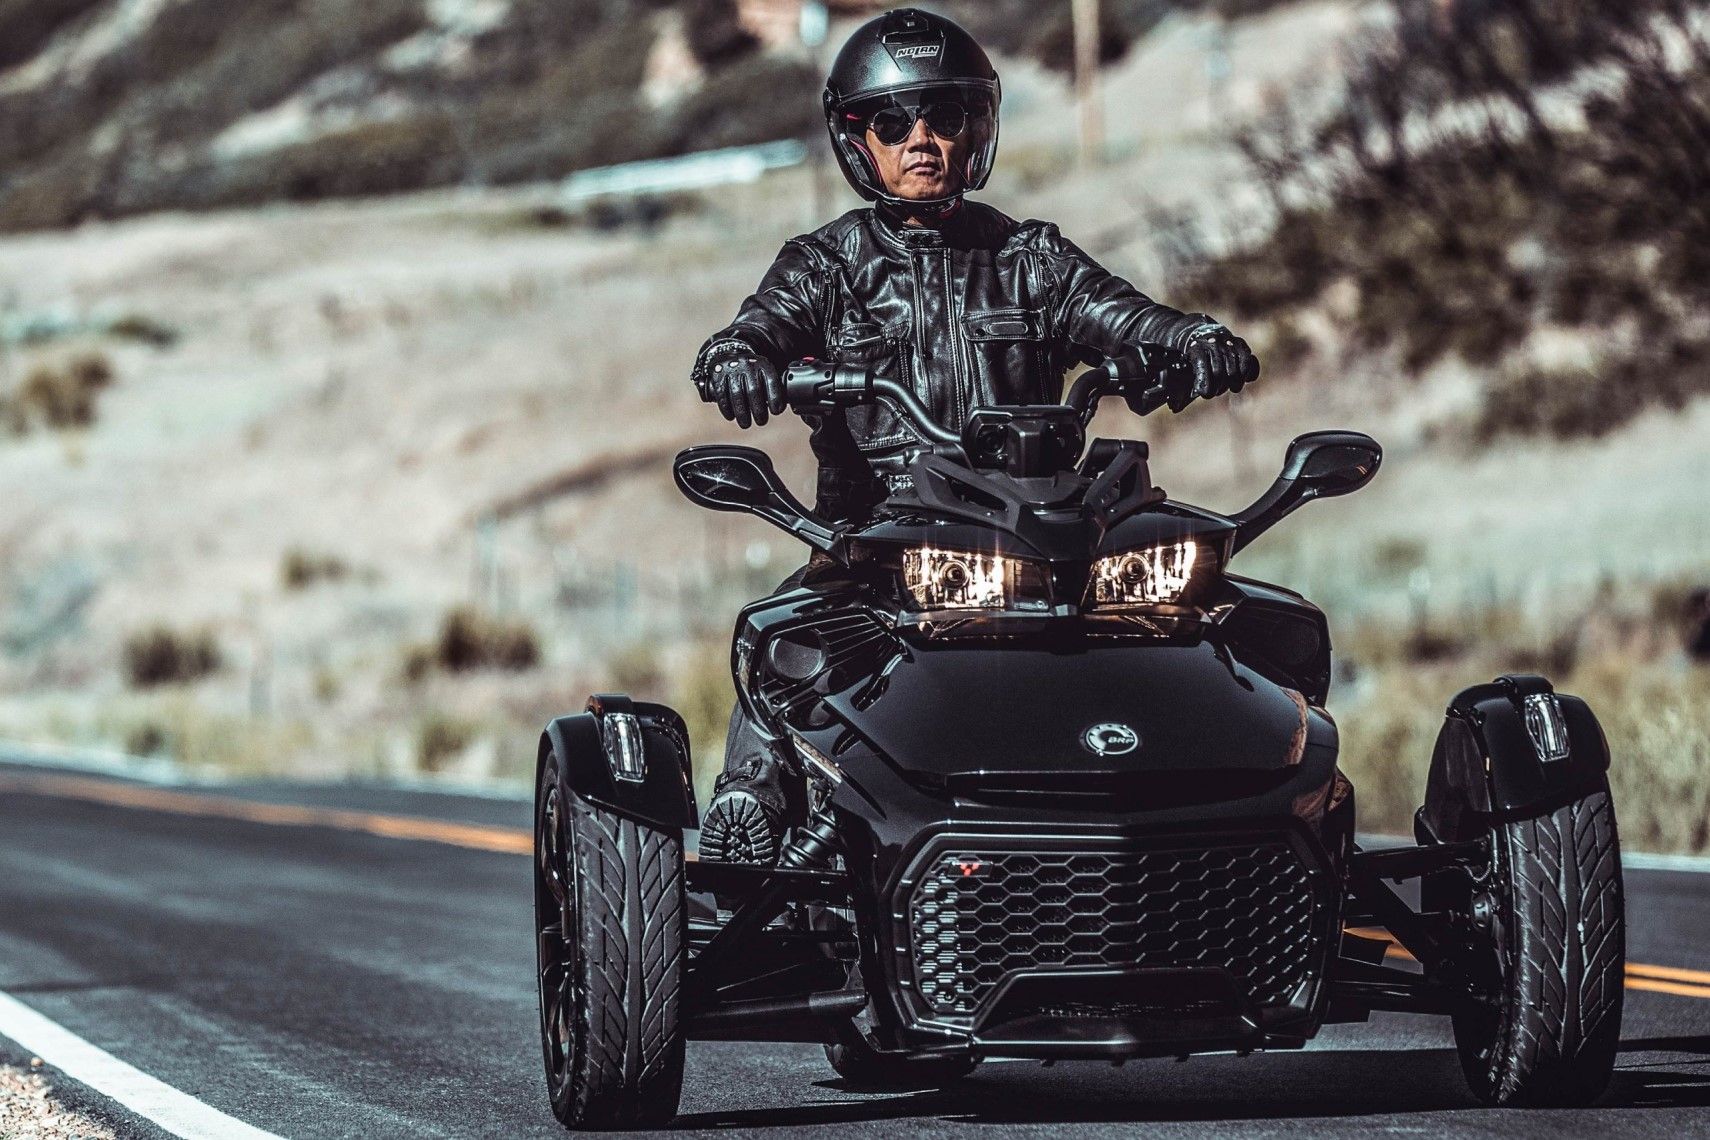 2021 Can-Am Spyder F3 front view